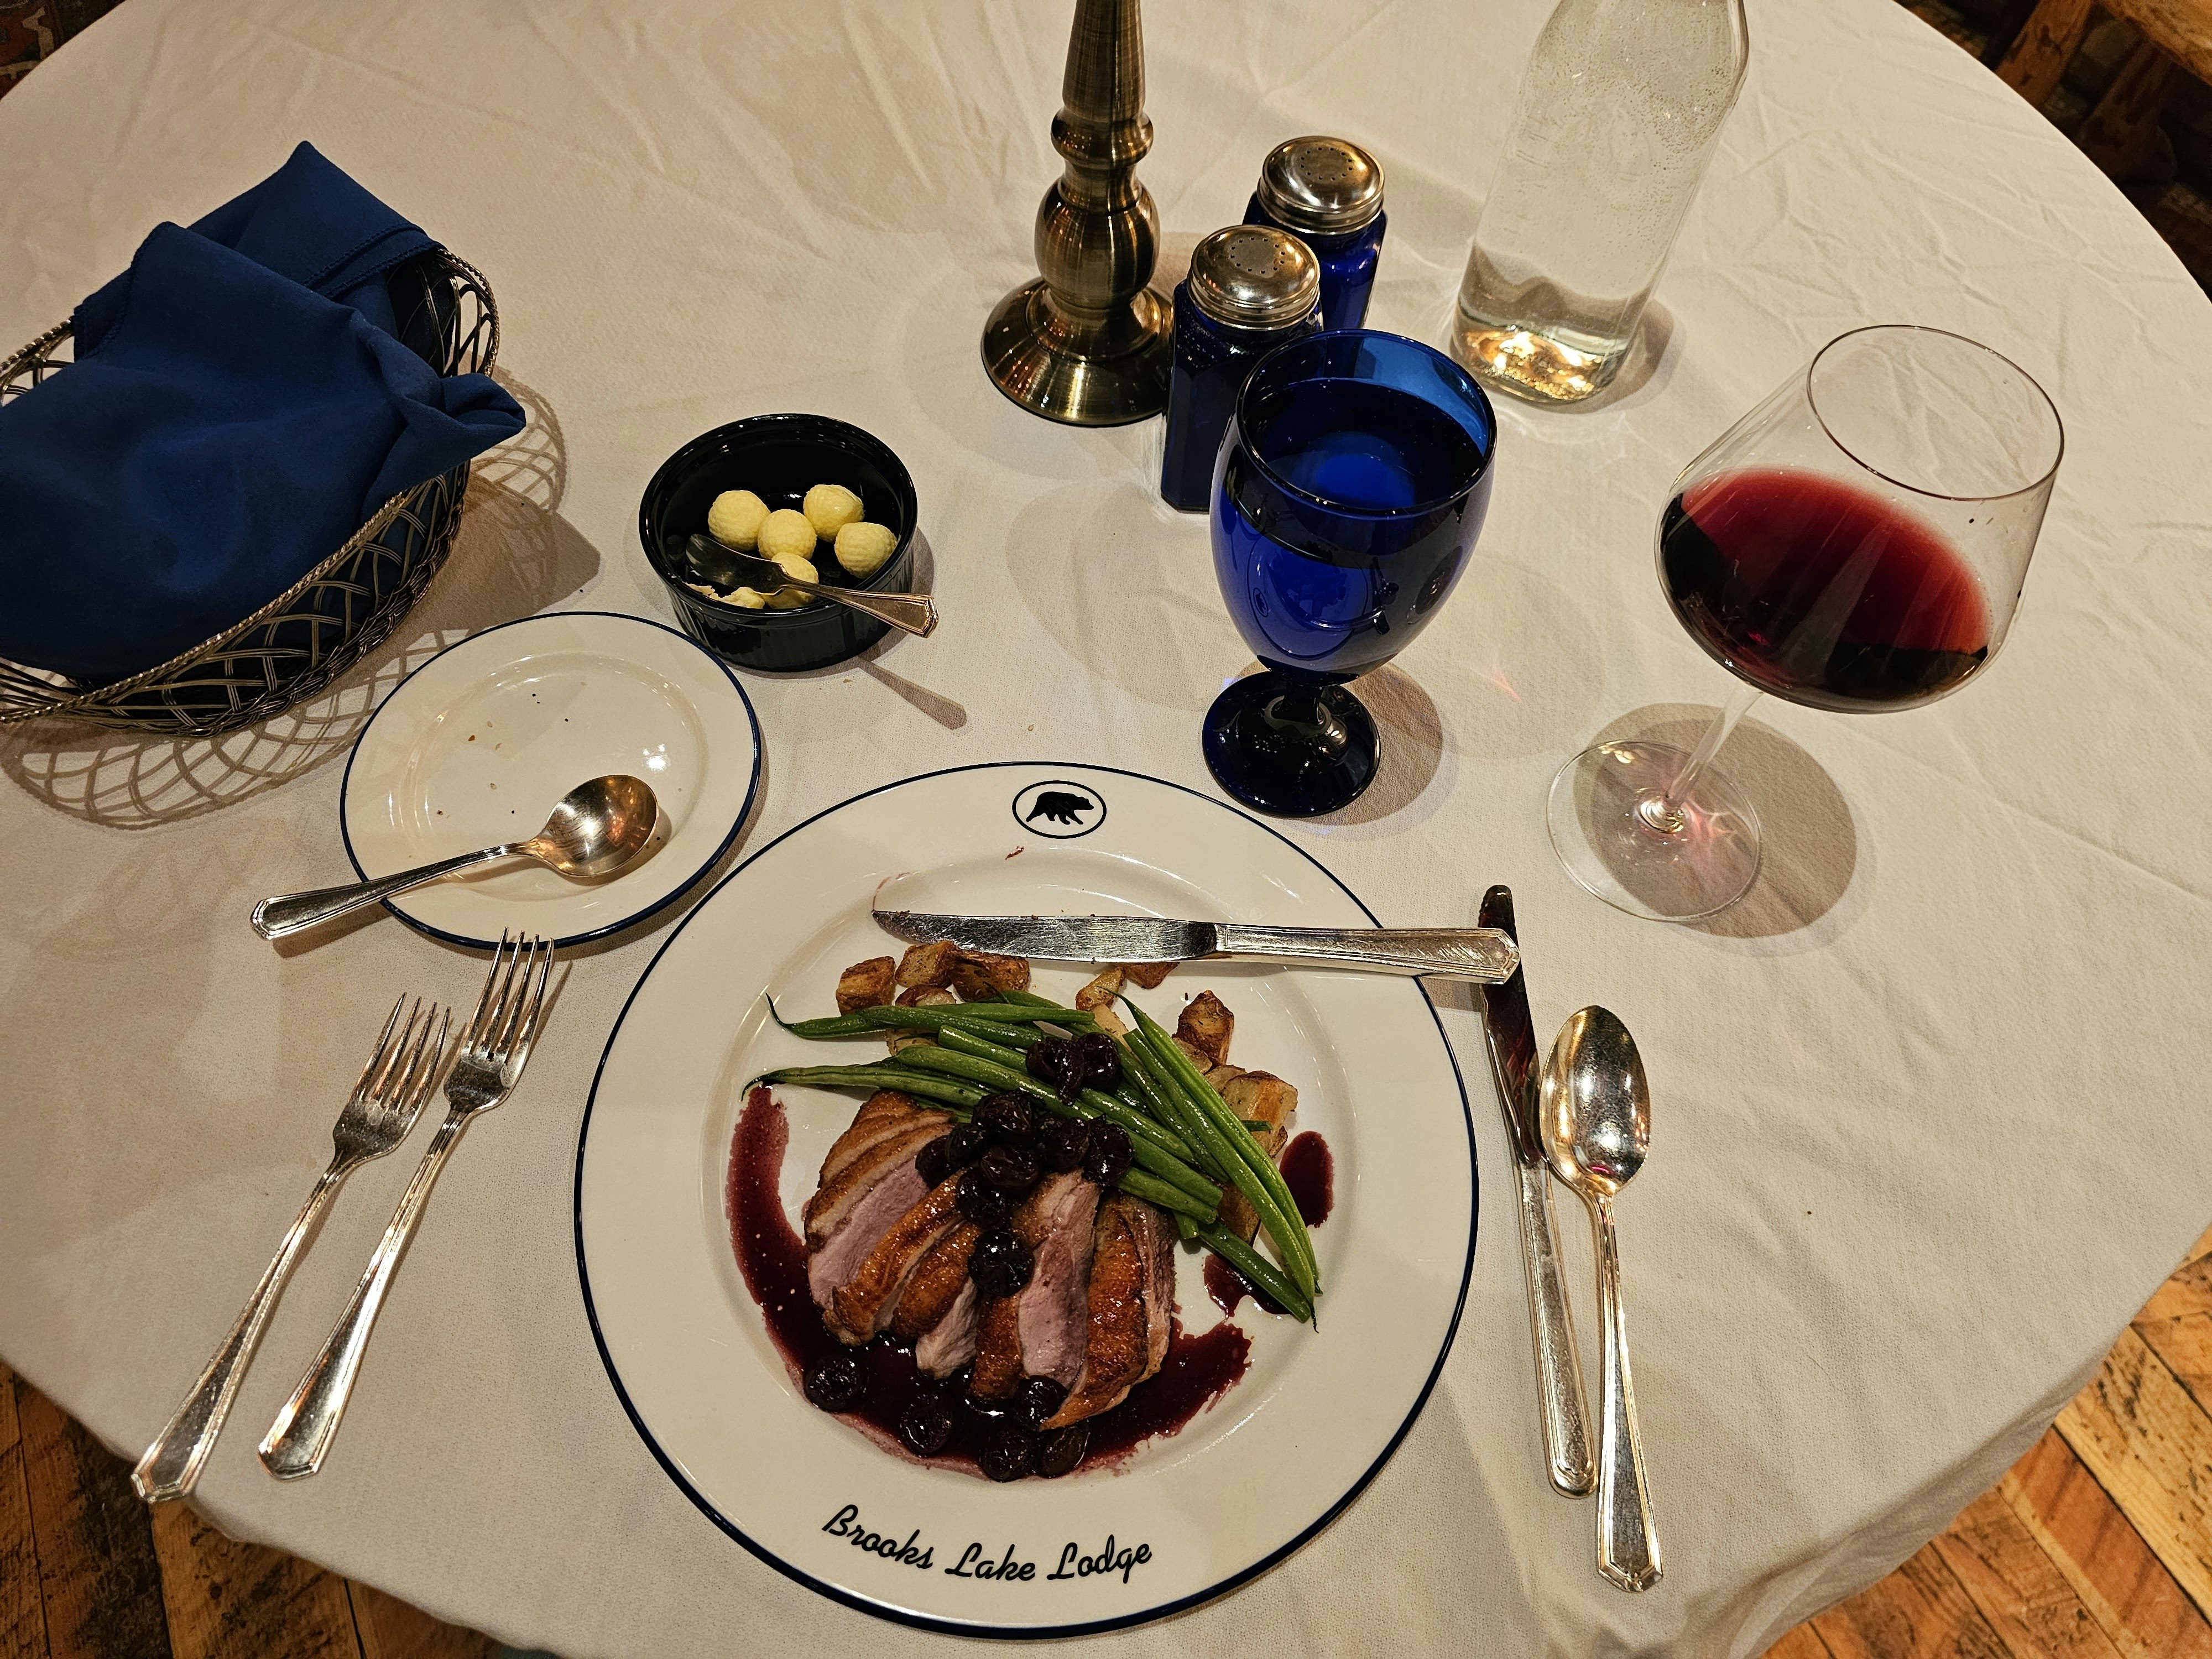 The duck has become chef Whitney Hall's favorite dish to make for Brooks Lake Lodge guests. It is absolutely delicious.